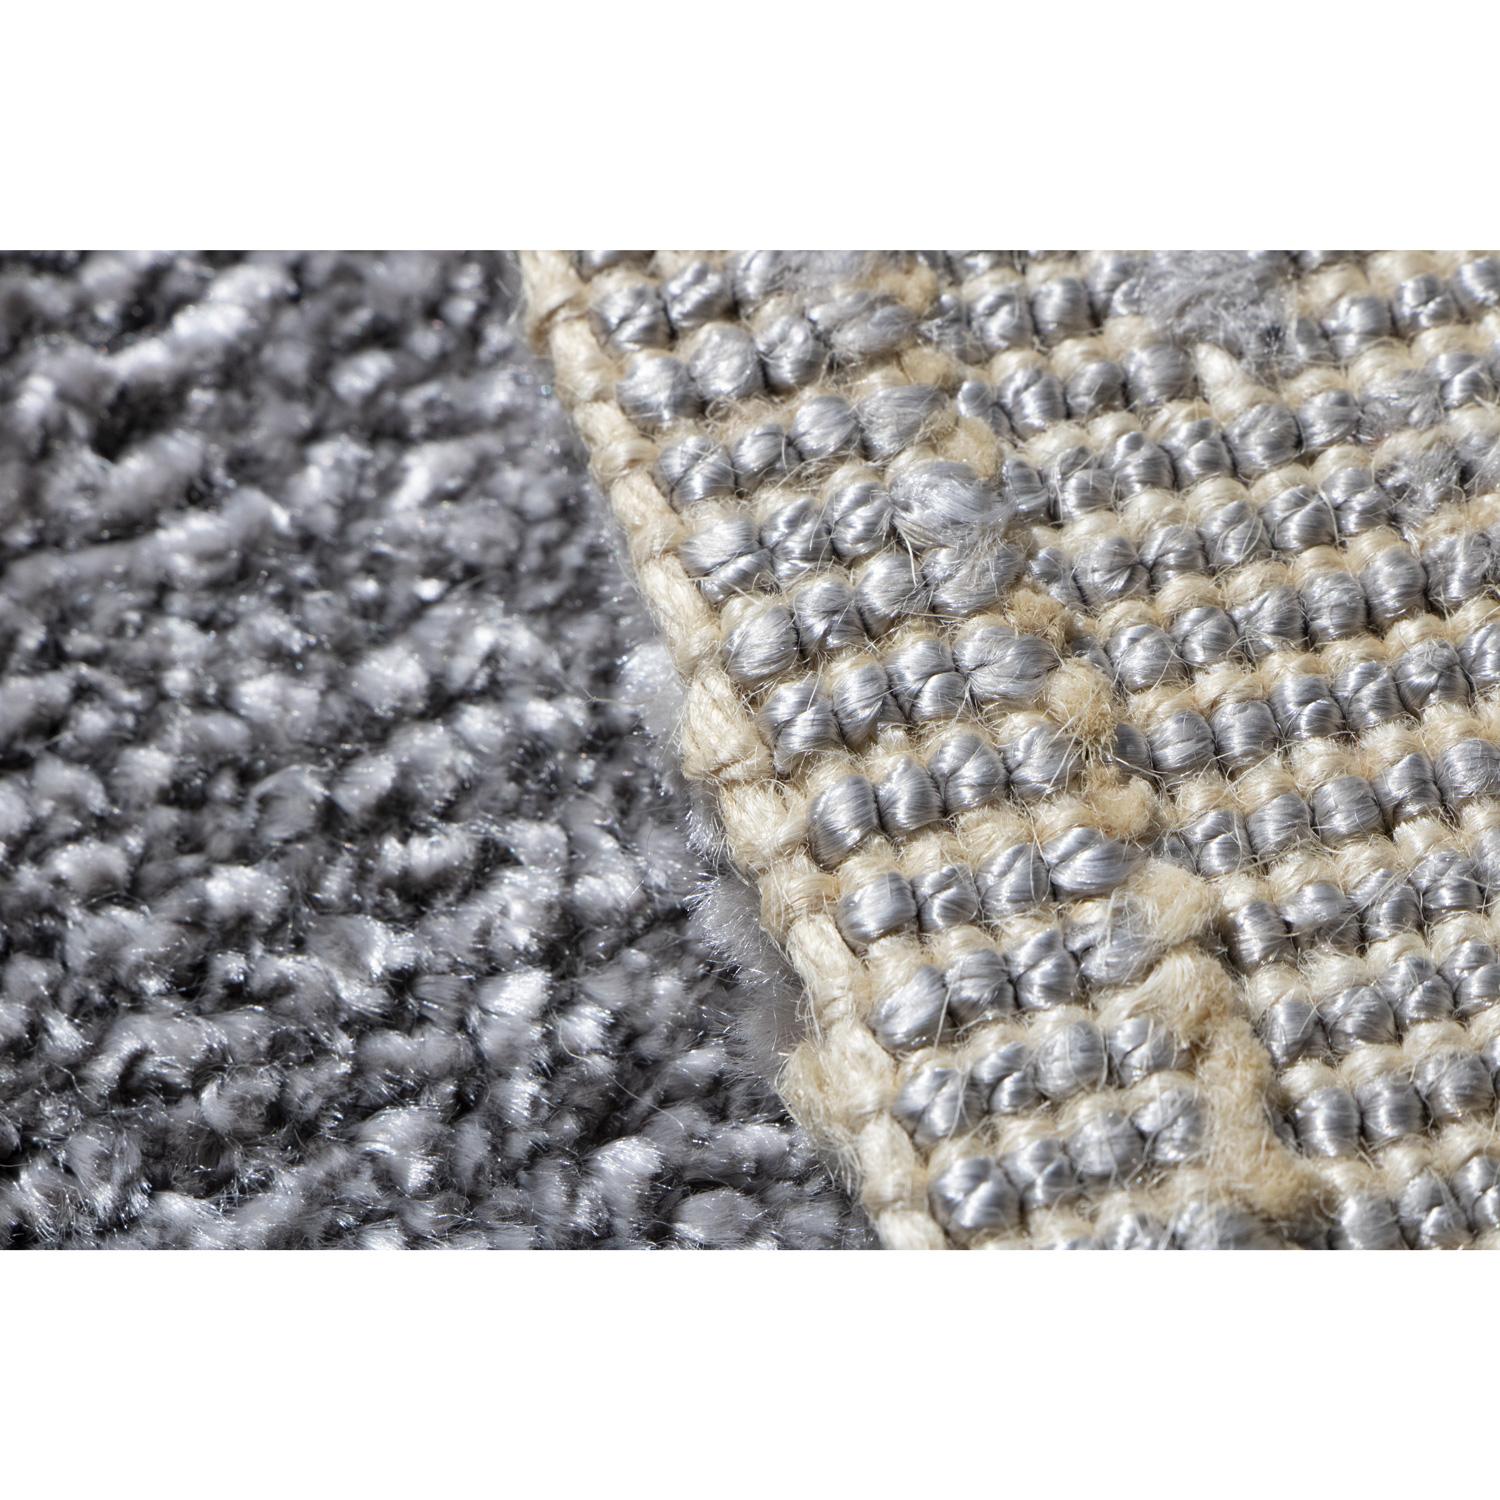 21st Cent Luxury Shiny Velvety Silvery Rug by Deanna Comellini In Stock 60x120cm For Sale 1